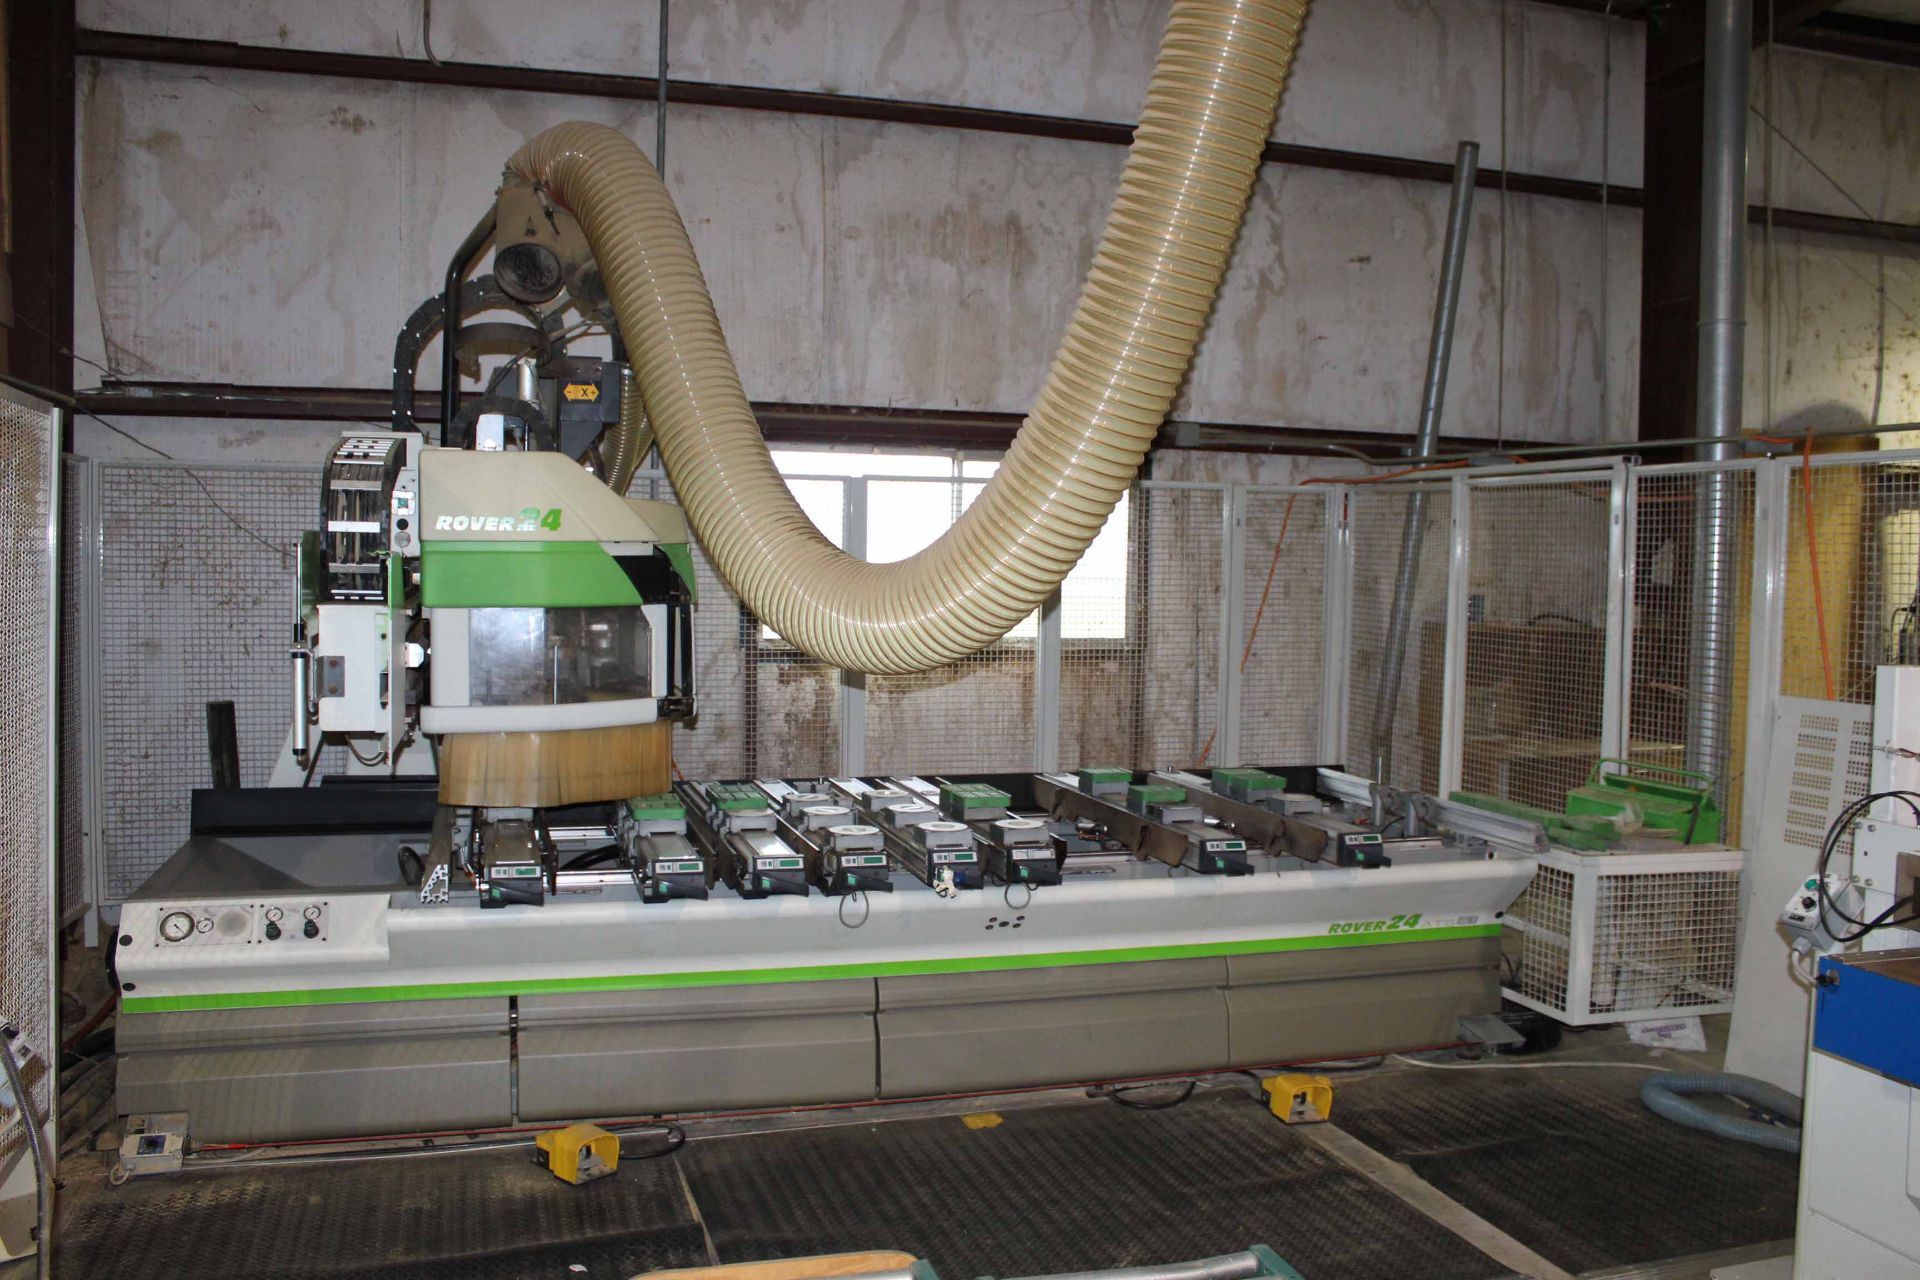 CNC POINT-TO-POINT WOOD MACHINING CENTER, BIESSE ROVER MDL. 24 ATS S1, new 2002, 4’ x 10’ table